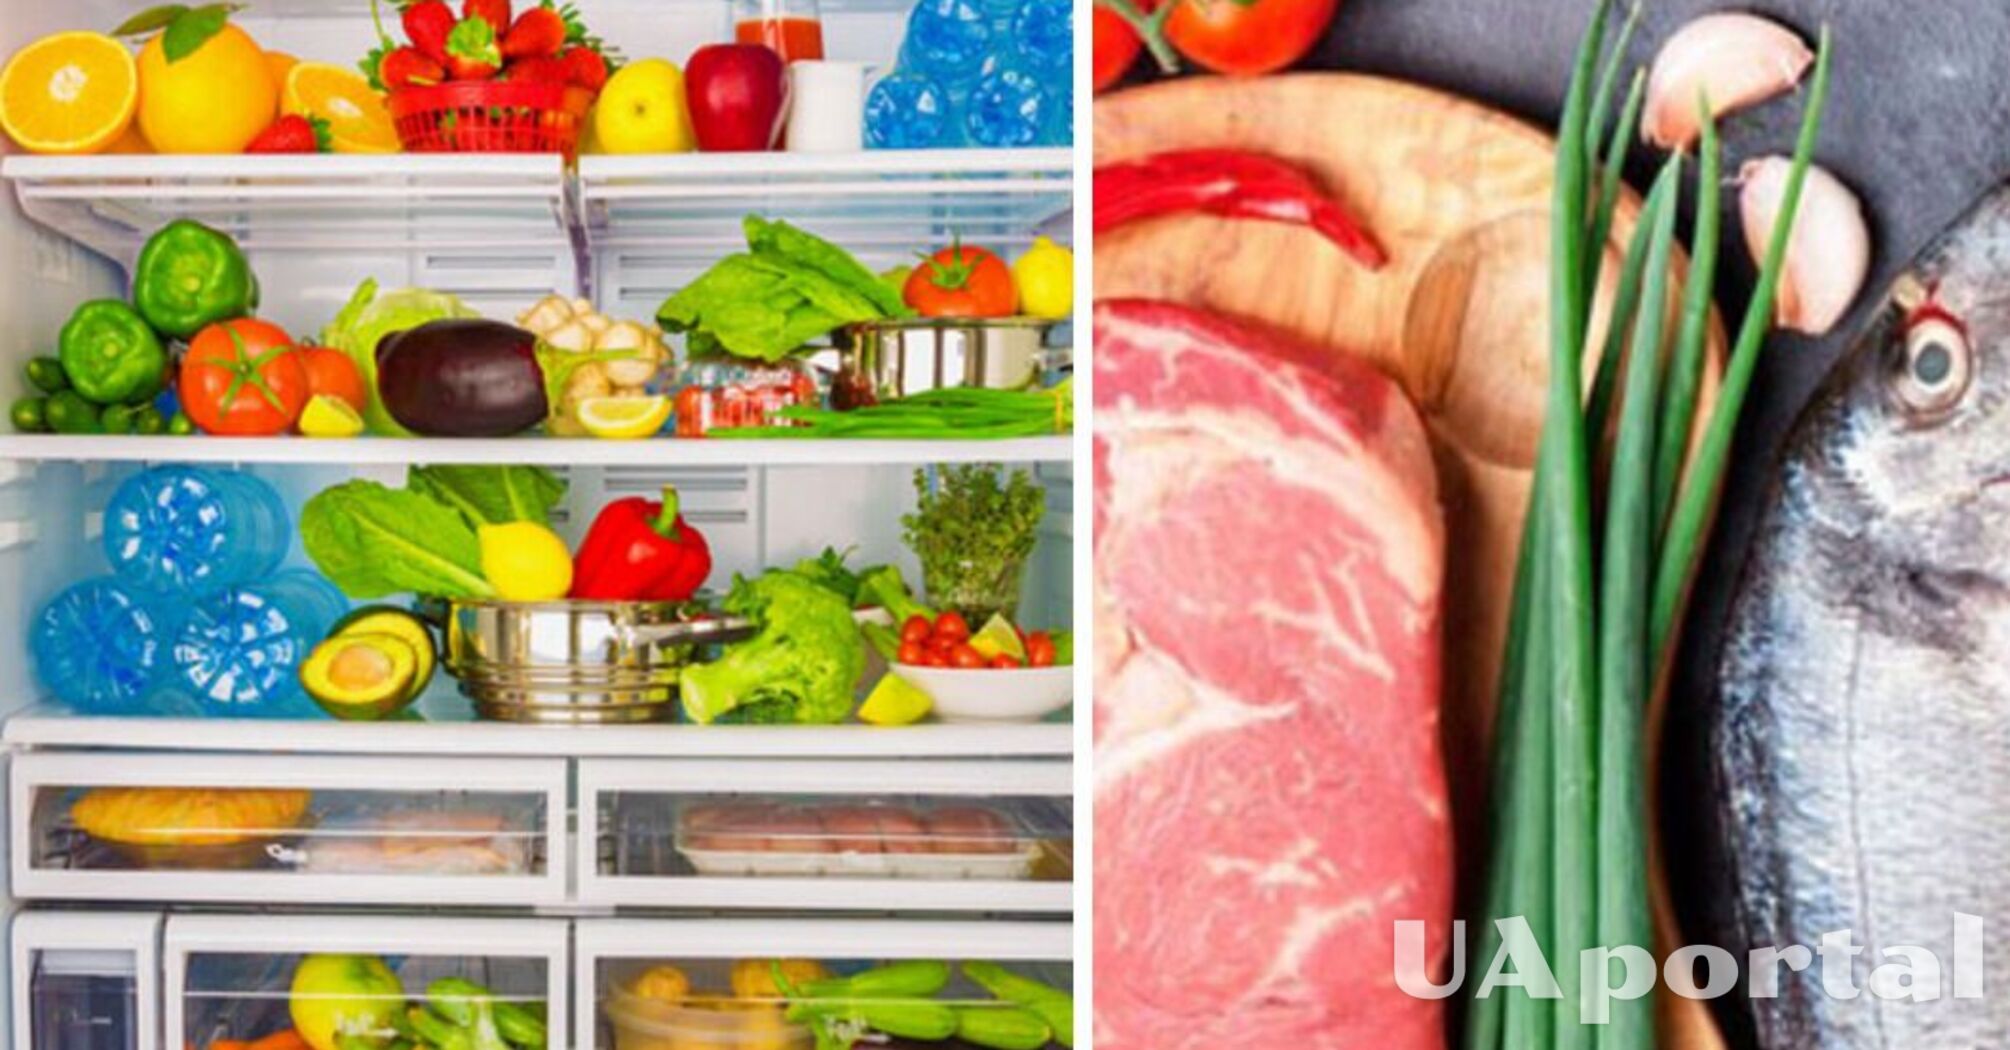 How to store food in the refrigerator: what is the '2-hour rule'?